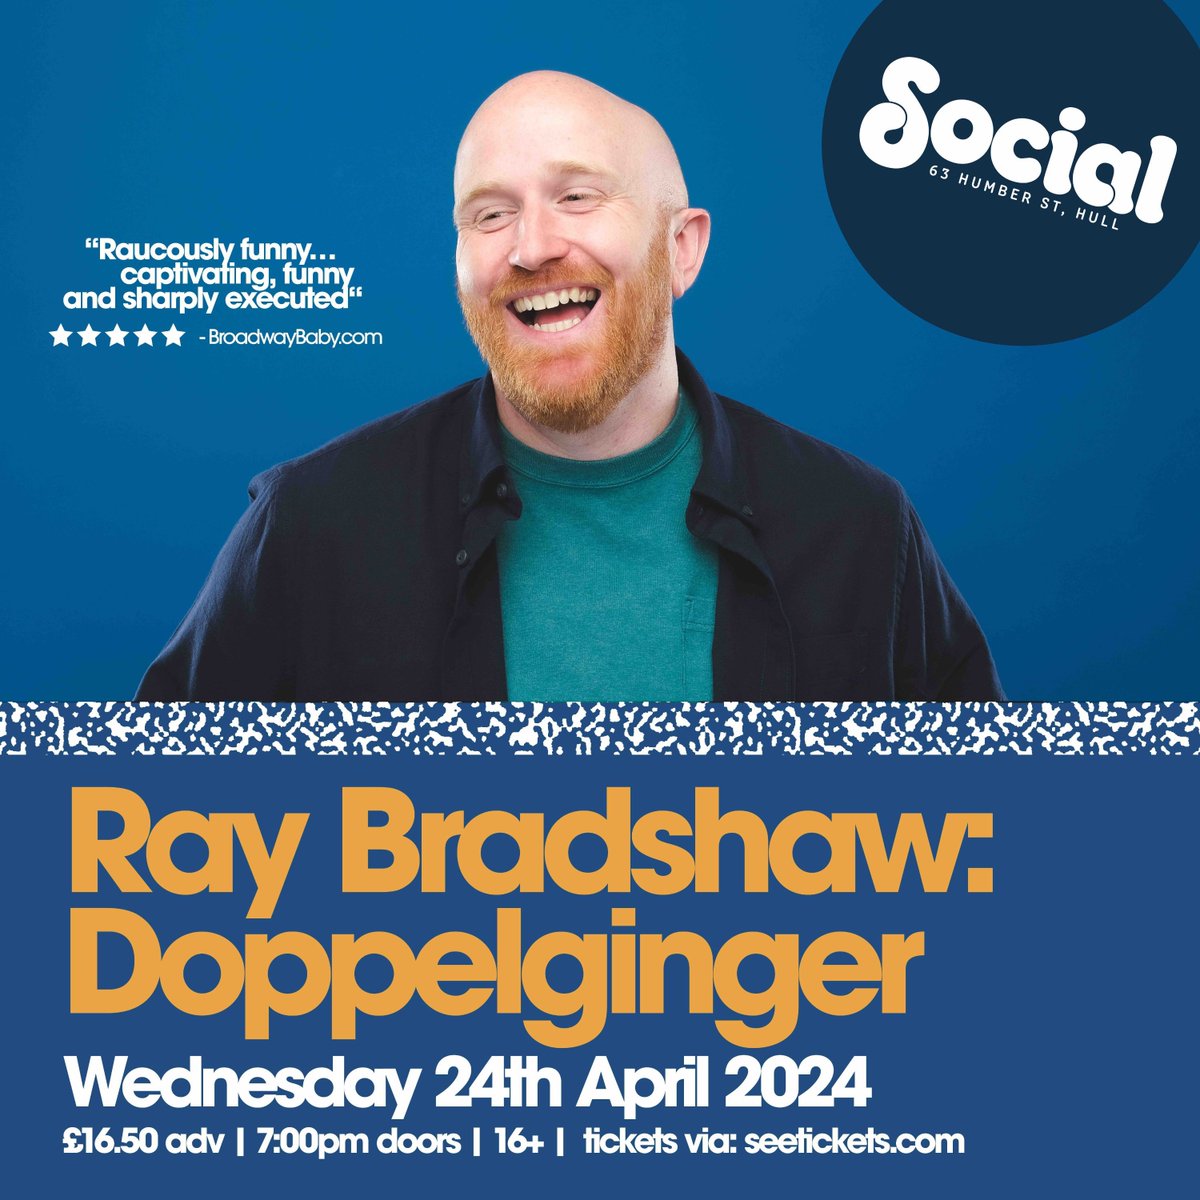 1️⃣ WEEK TO GO Multi-award-winning comedian @comedyray brings his new show to Hull on Wednesday 24th April. 🎟 book tickets: bit.ly/RayBradshawHull Doppelginger is a funny heartwarming comedy show about a silly search for a man with an orange beard who’s follicly challenged.